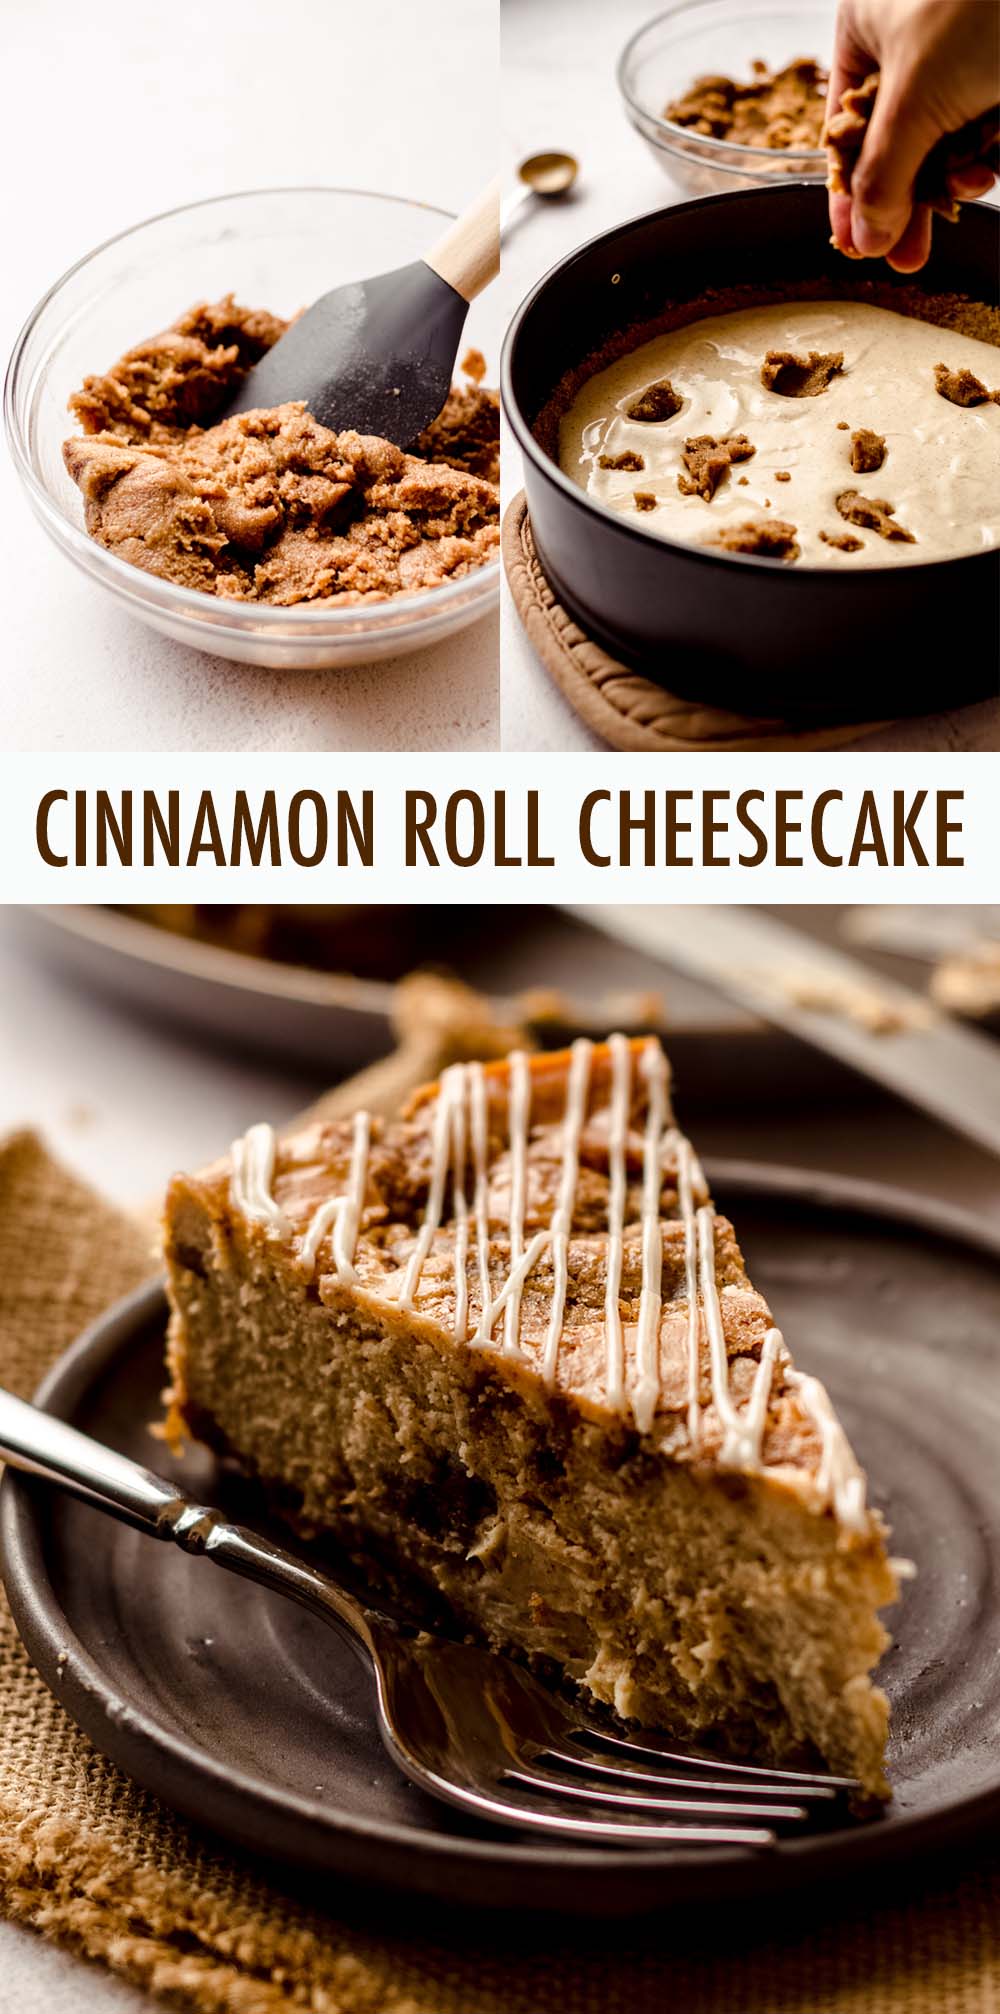 Cinnamon spiced cheesecake studded with chunks of cinnamon filling and topped with a cream cheese frosting drizzle. via @frshaprilflours